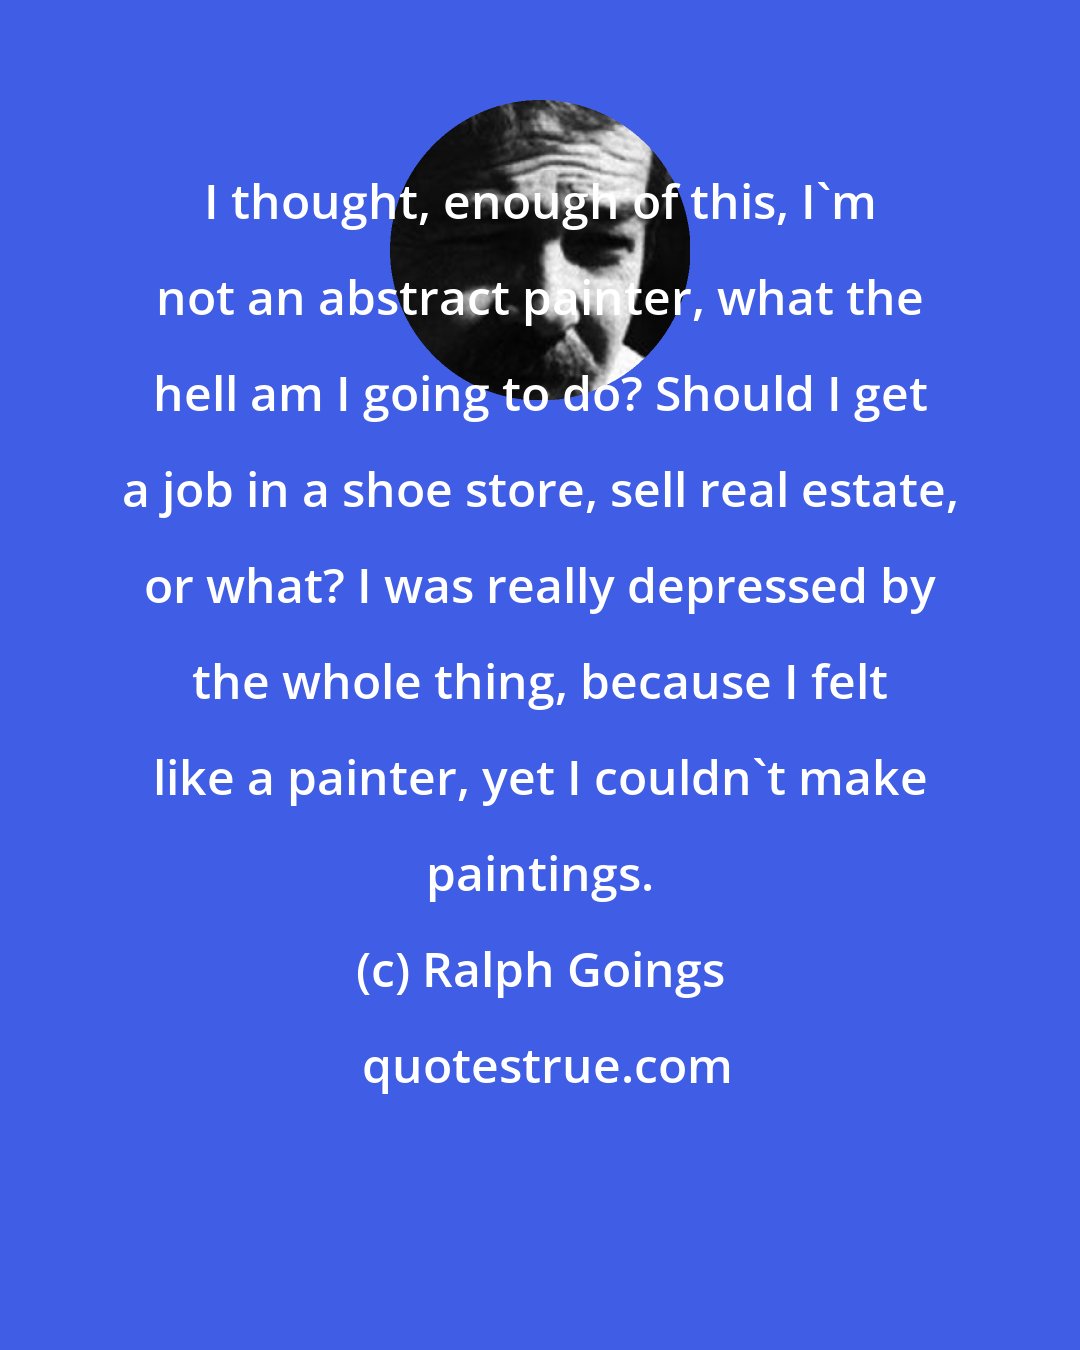 Ralph Goings: I thought, enough of this, I'm not an abstract painter, what the hell am I going to do? Should I get a job in a shoe store, sell real estate, or what? I was really depressed by the whole thing, because I felt like a painter, yet I couldn't make paintings.